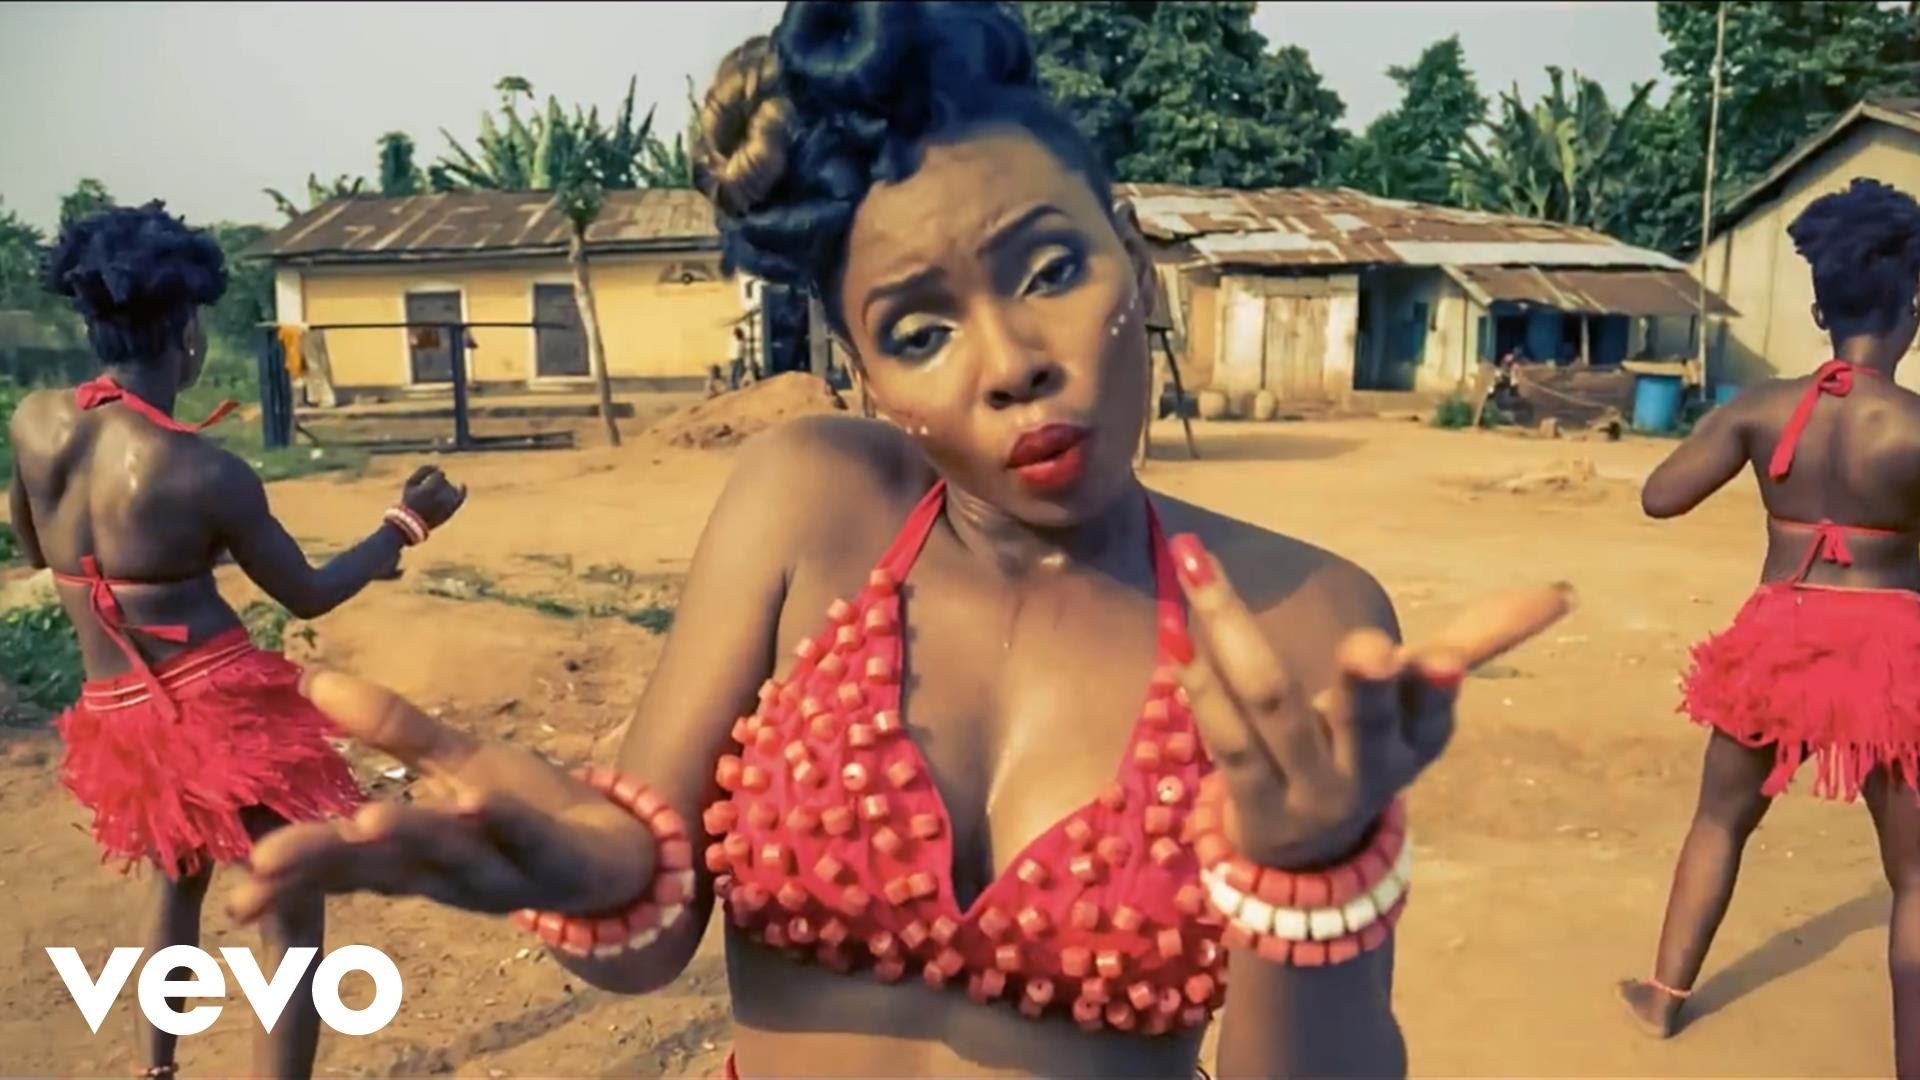 Yemi Alade's 'Johnny' becomes most viewed music video on YouTube by an African woman